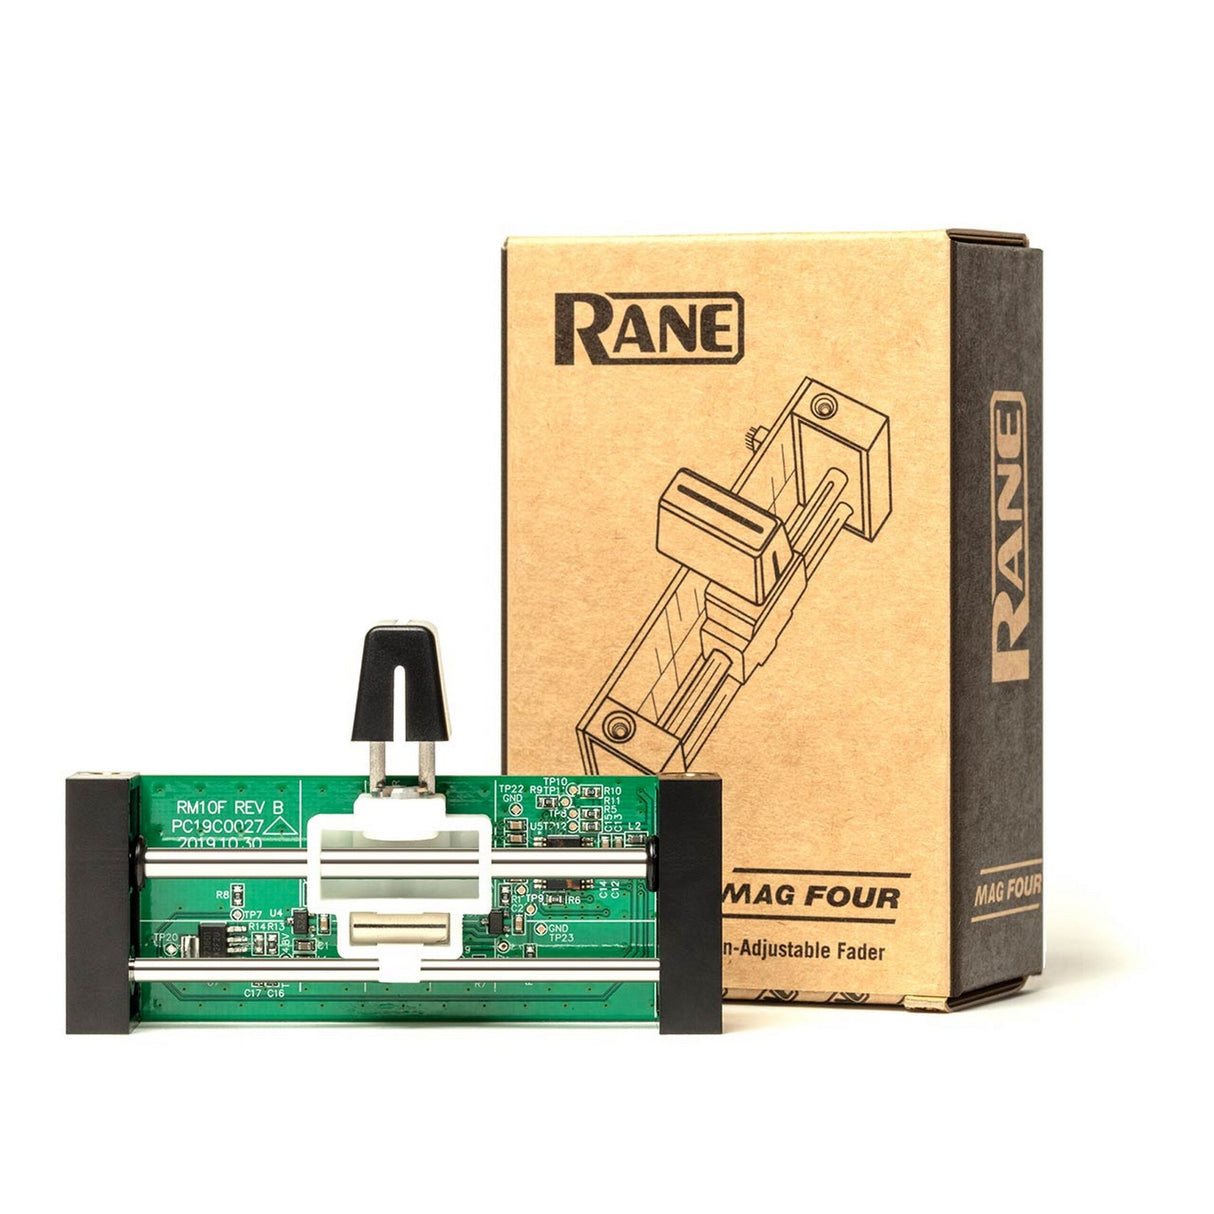 RANE MAG FOUR Contactless Tension Adjustable Fader